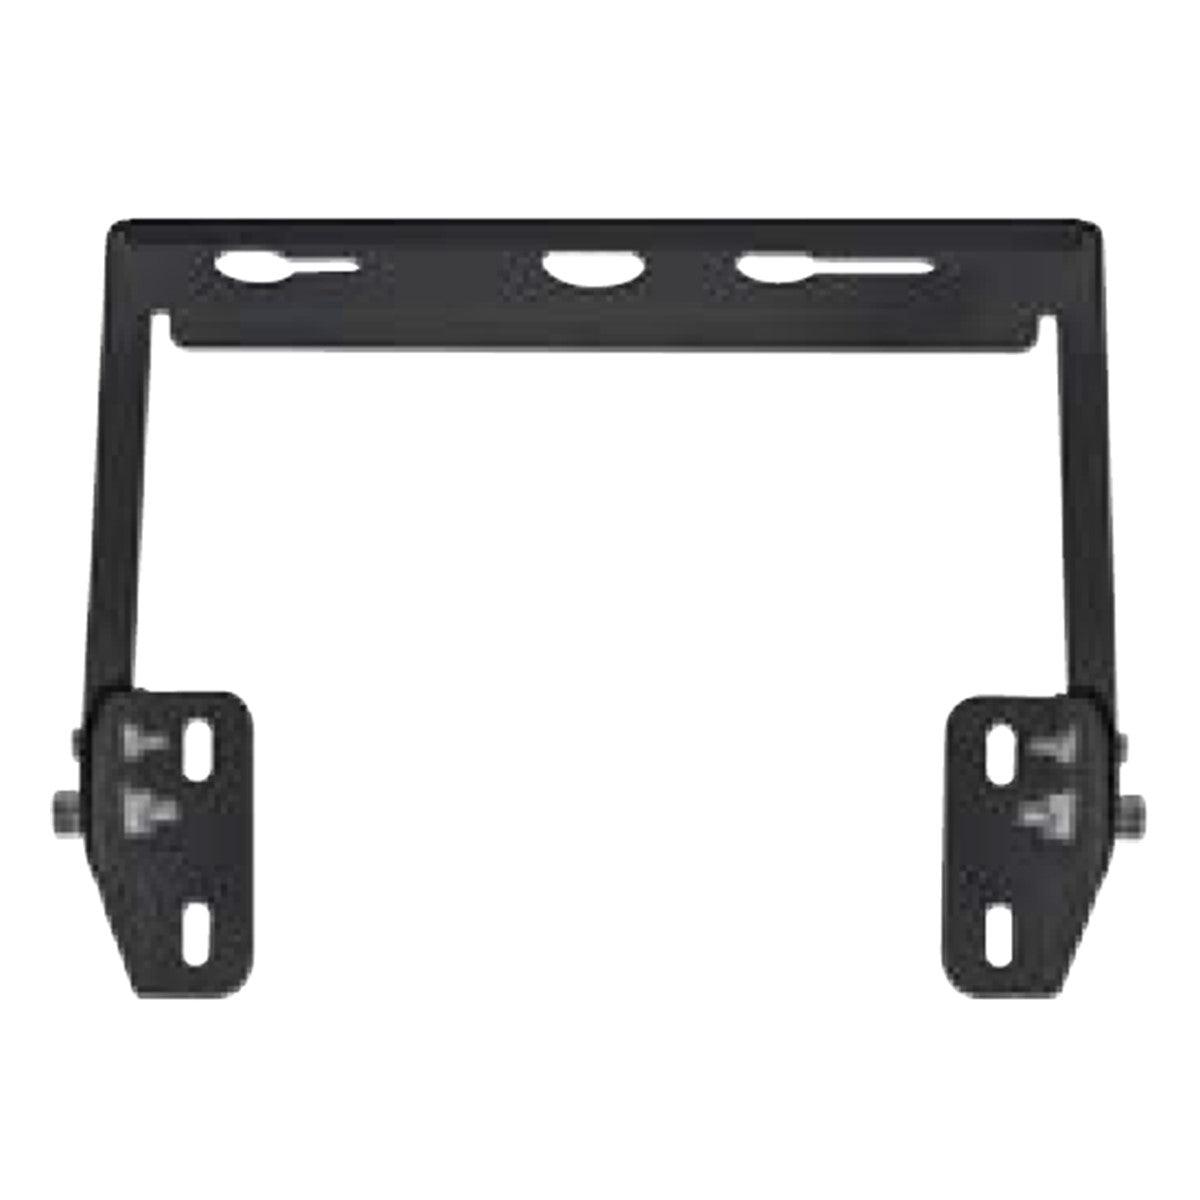 Sylvania UFO High Bay 3A Black Surface/Pendant Mount Bracket, For 100-150W Products